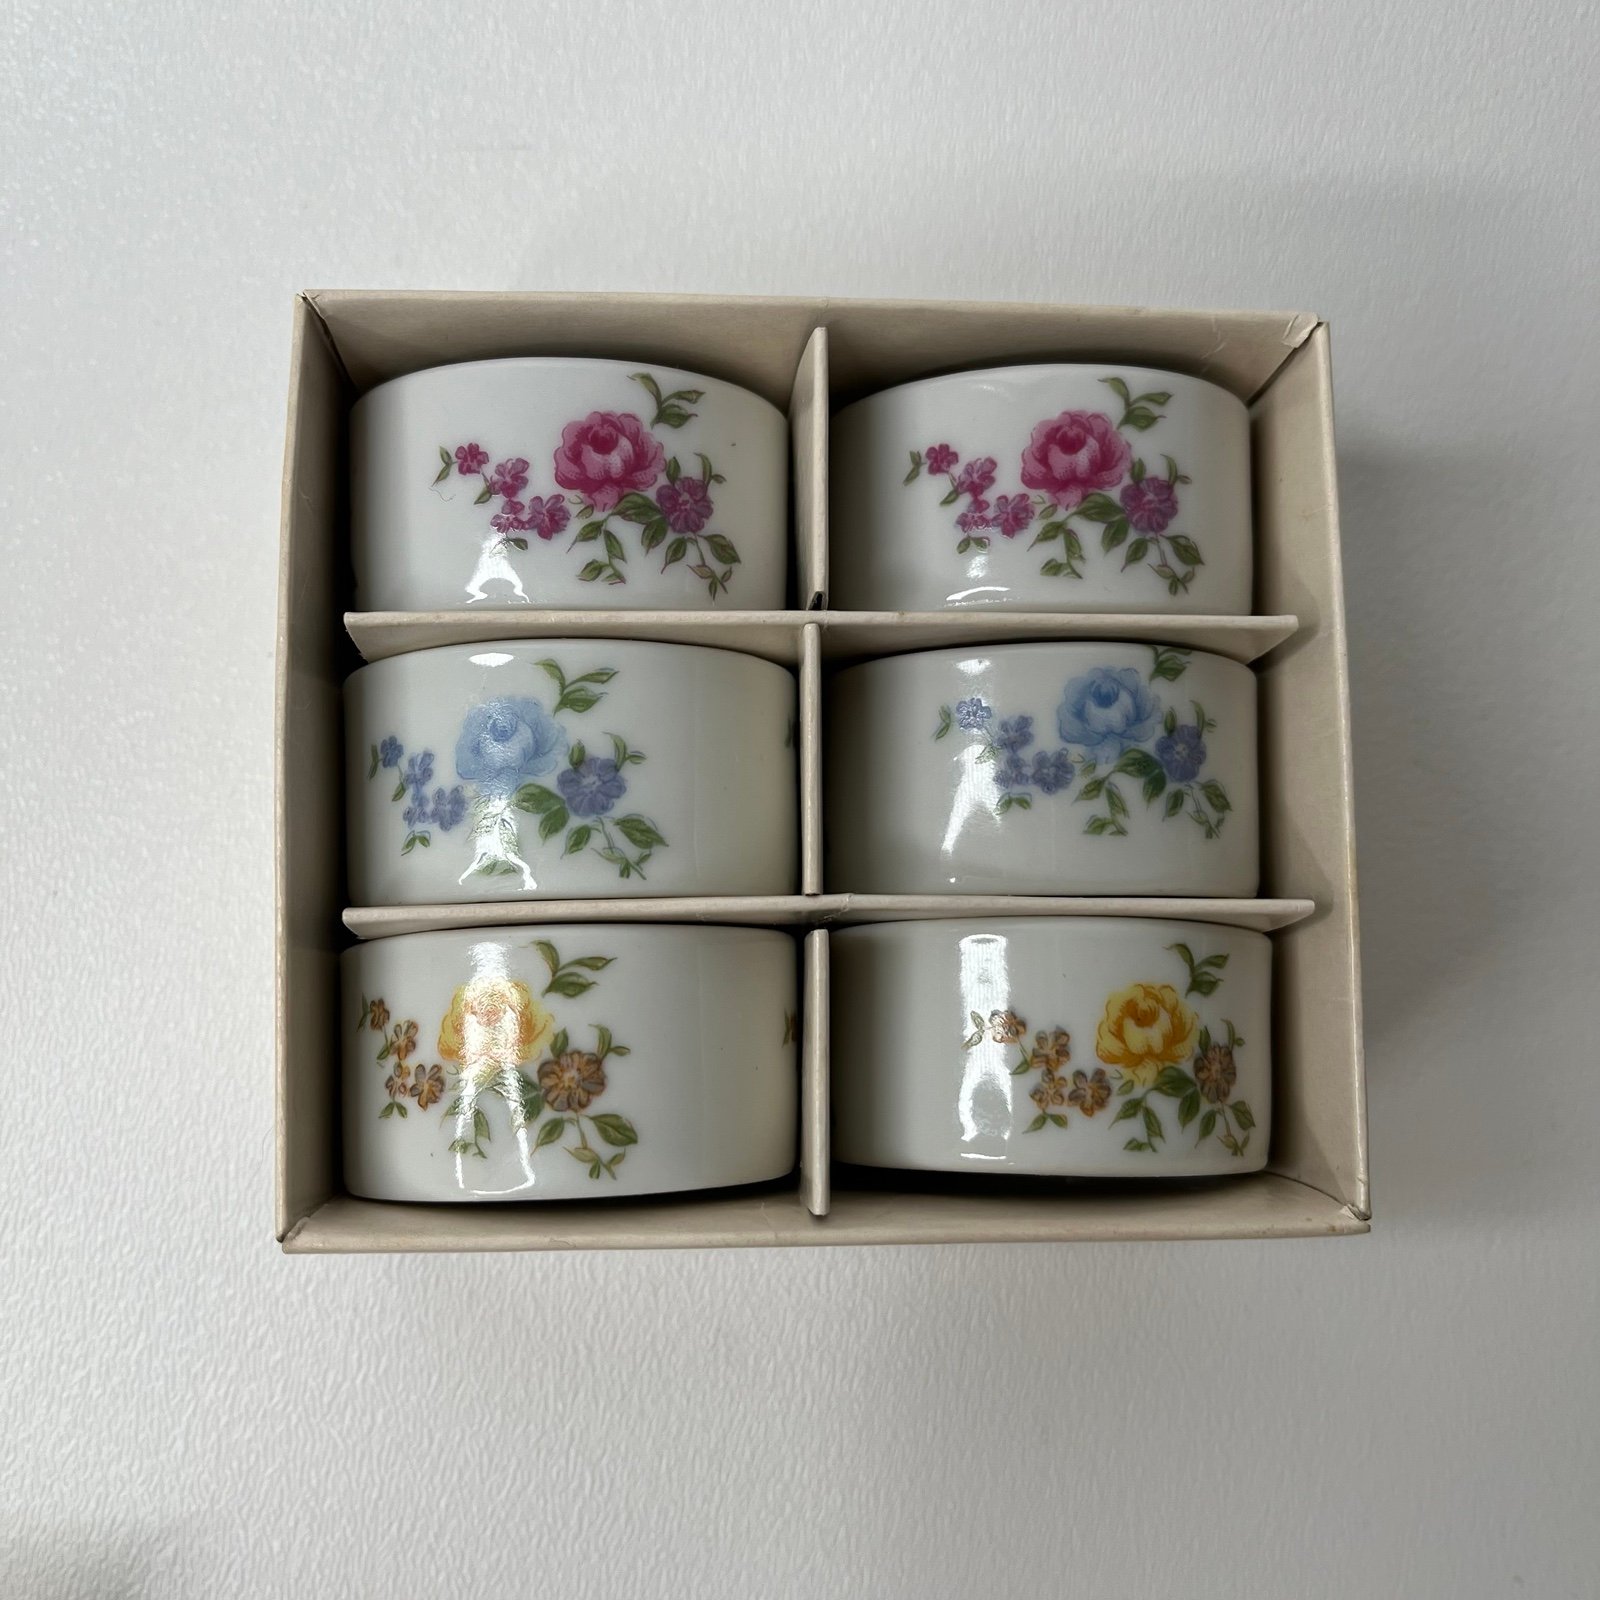 Shafford Porcelain Floral Napkin Rings Set Of Six Made In Japan dyasFacwC